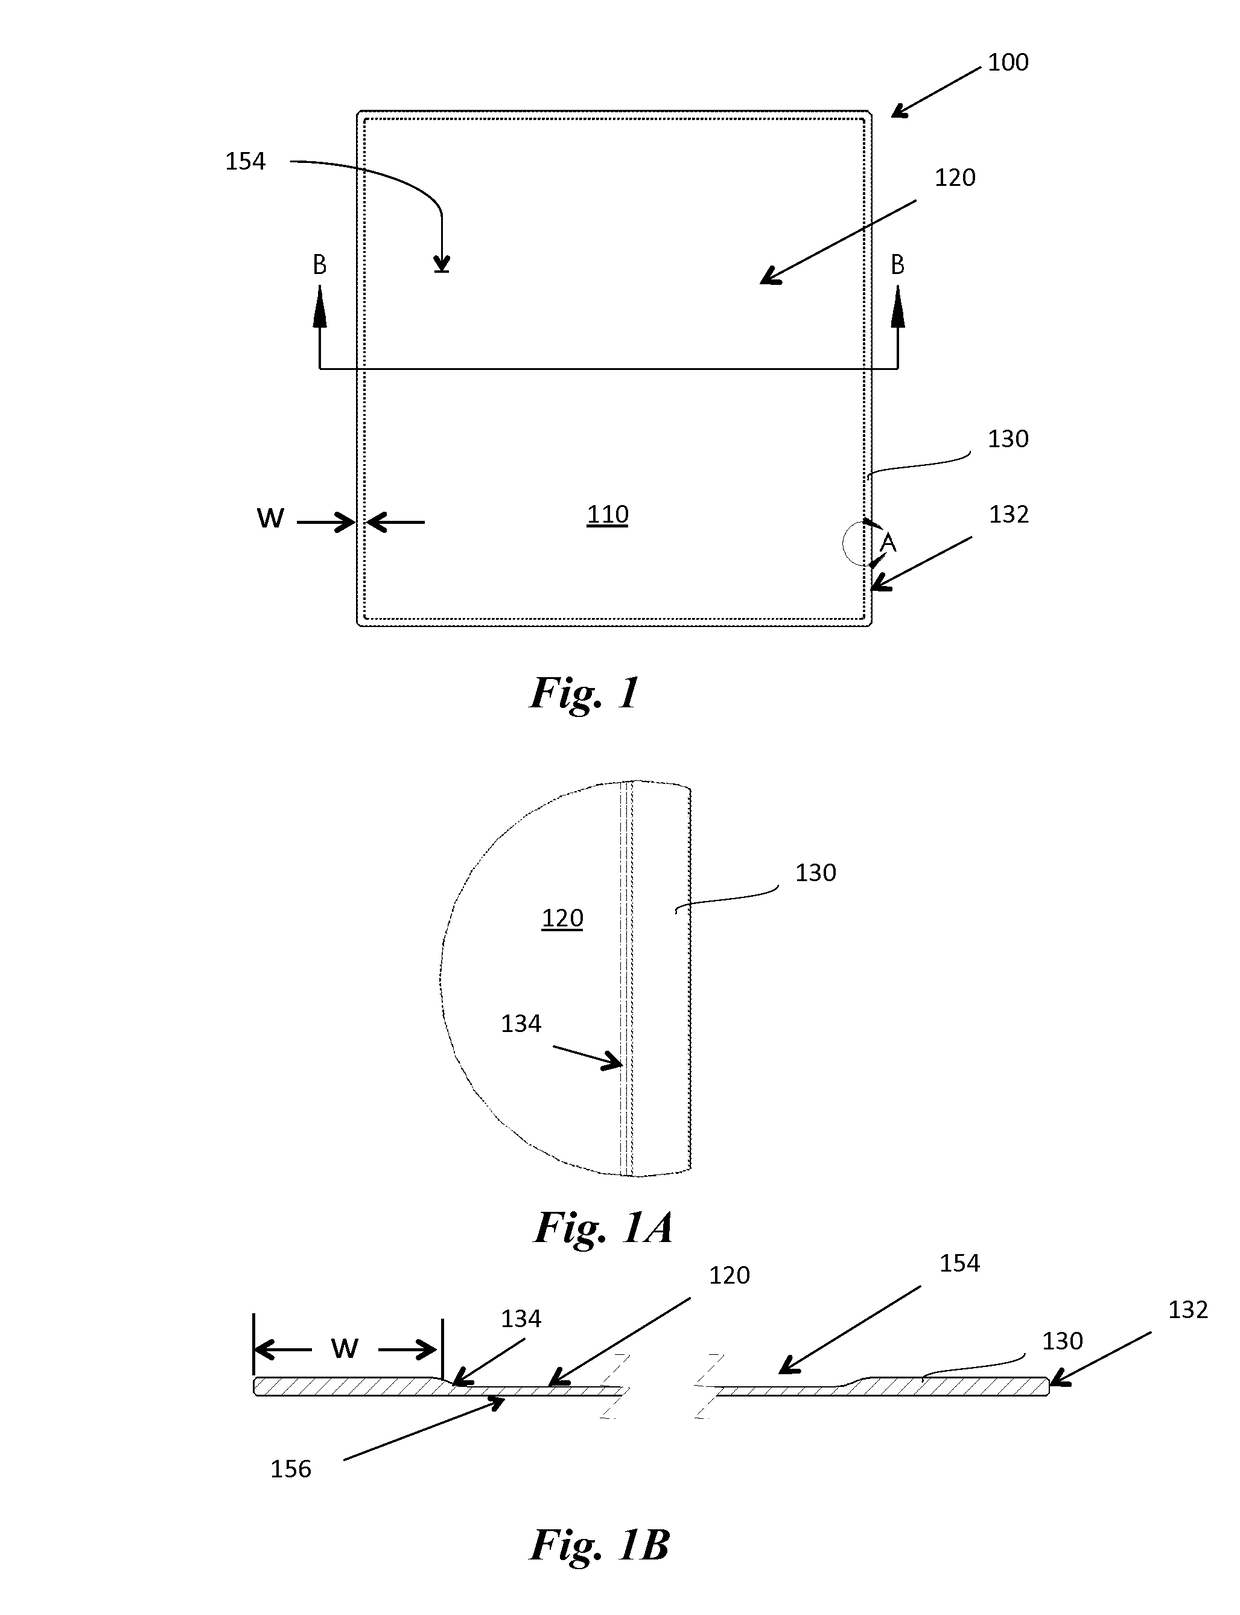 Methods and apparati for making thin semi-conductor wafers with locally controlled regions that are relatively thicker than other regions and such wafers